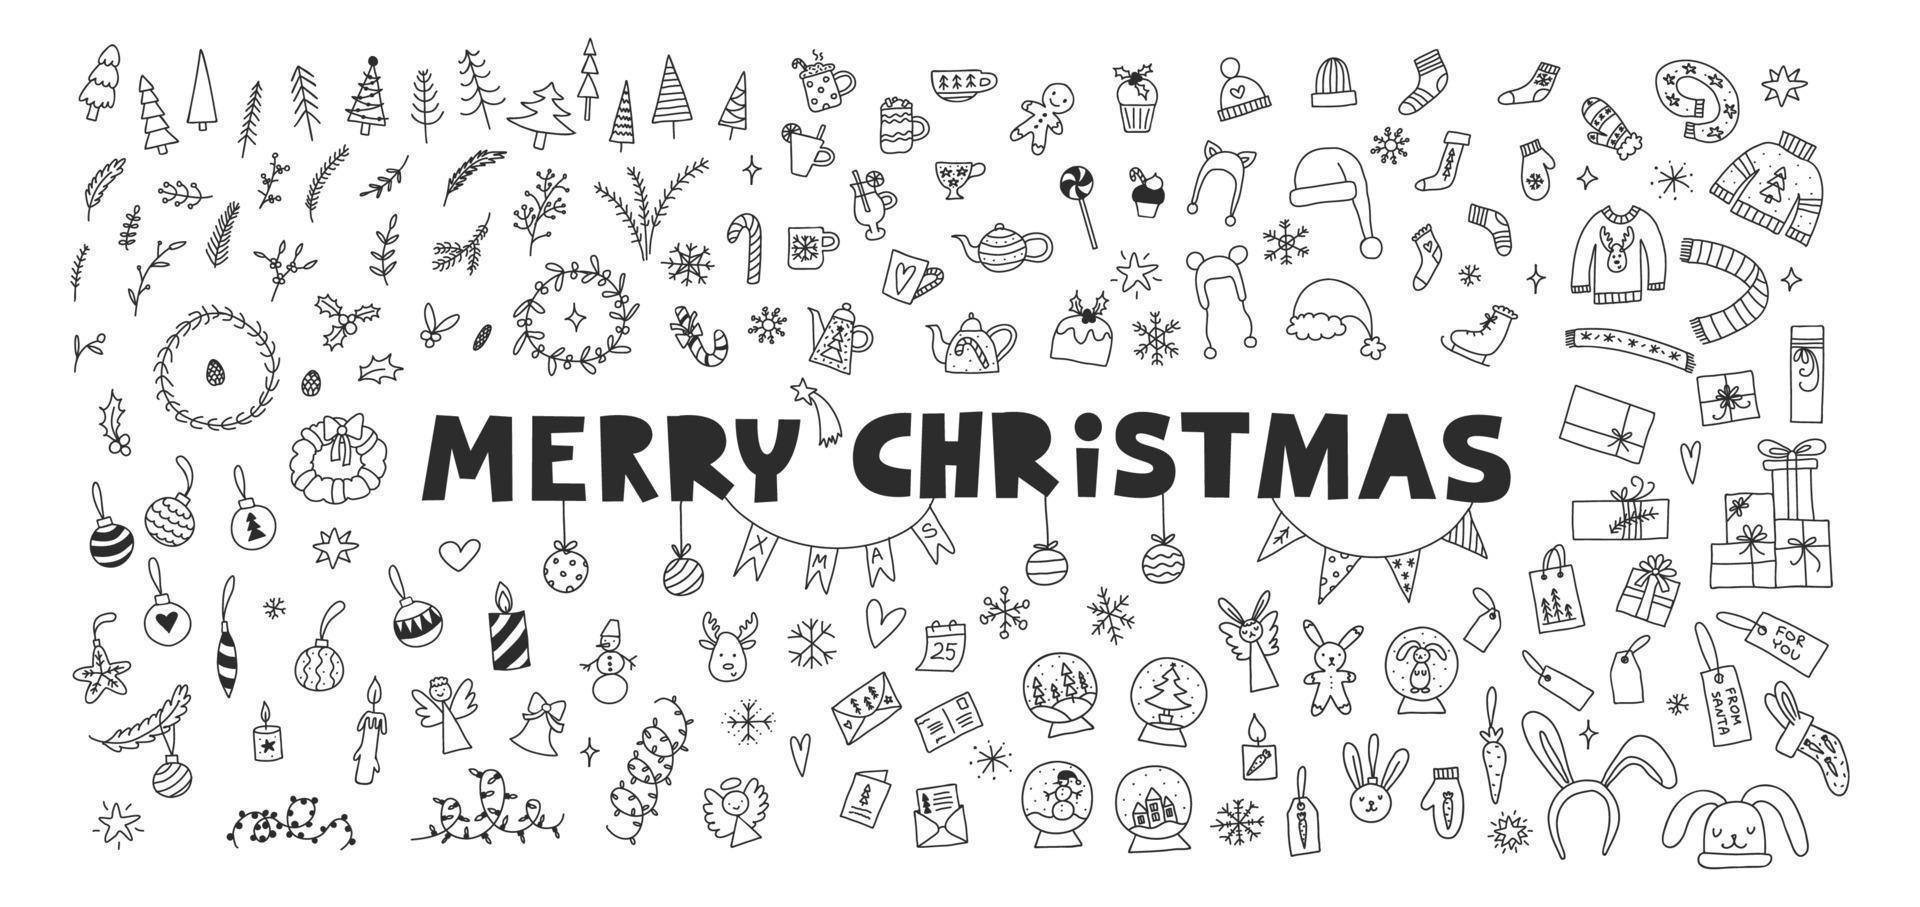 Xmas symbols and elements hand drawn doodle collection. Merry Christmas lettering clipart. Cozy winter and happy holidays concept. Vector illustration set in black and white.